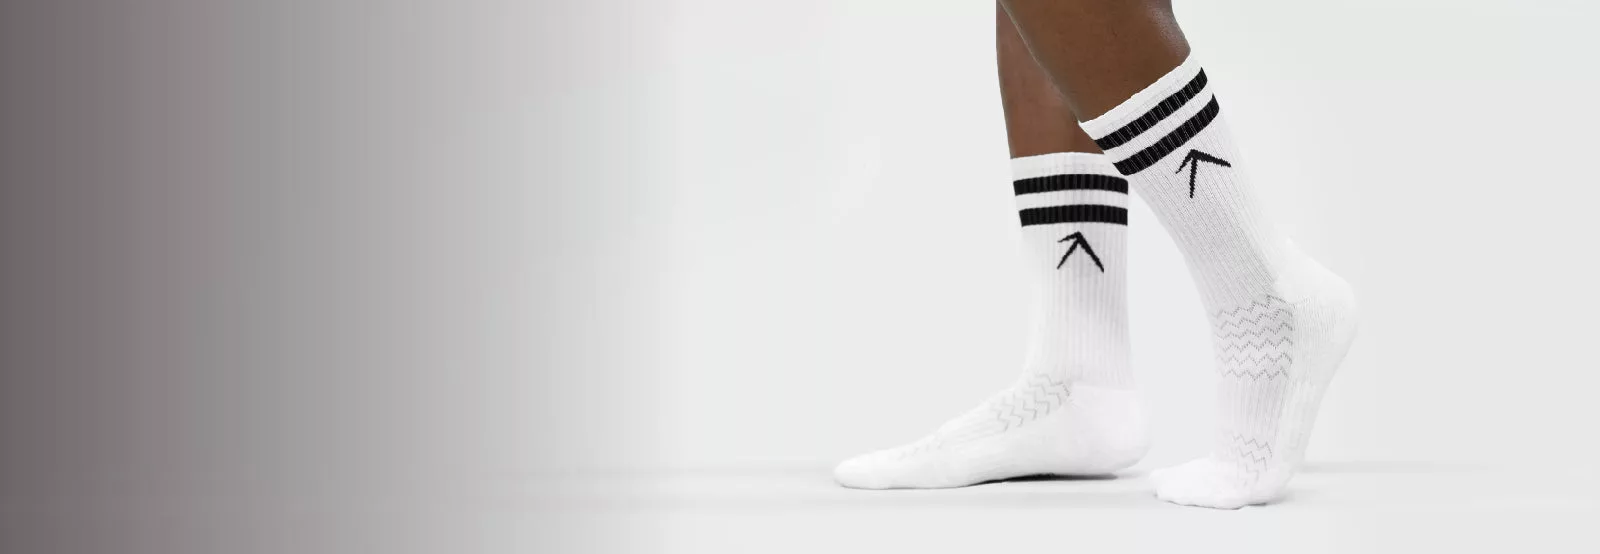 Comfort and Style with the Wizard Athleisure Socks Collection